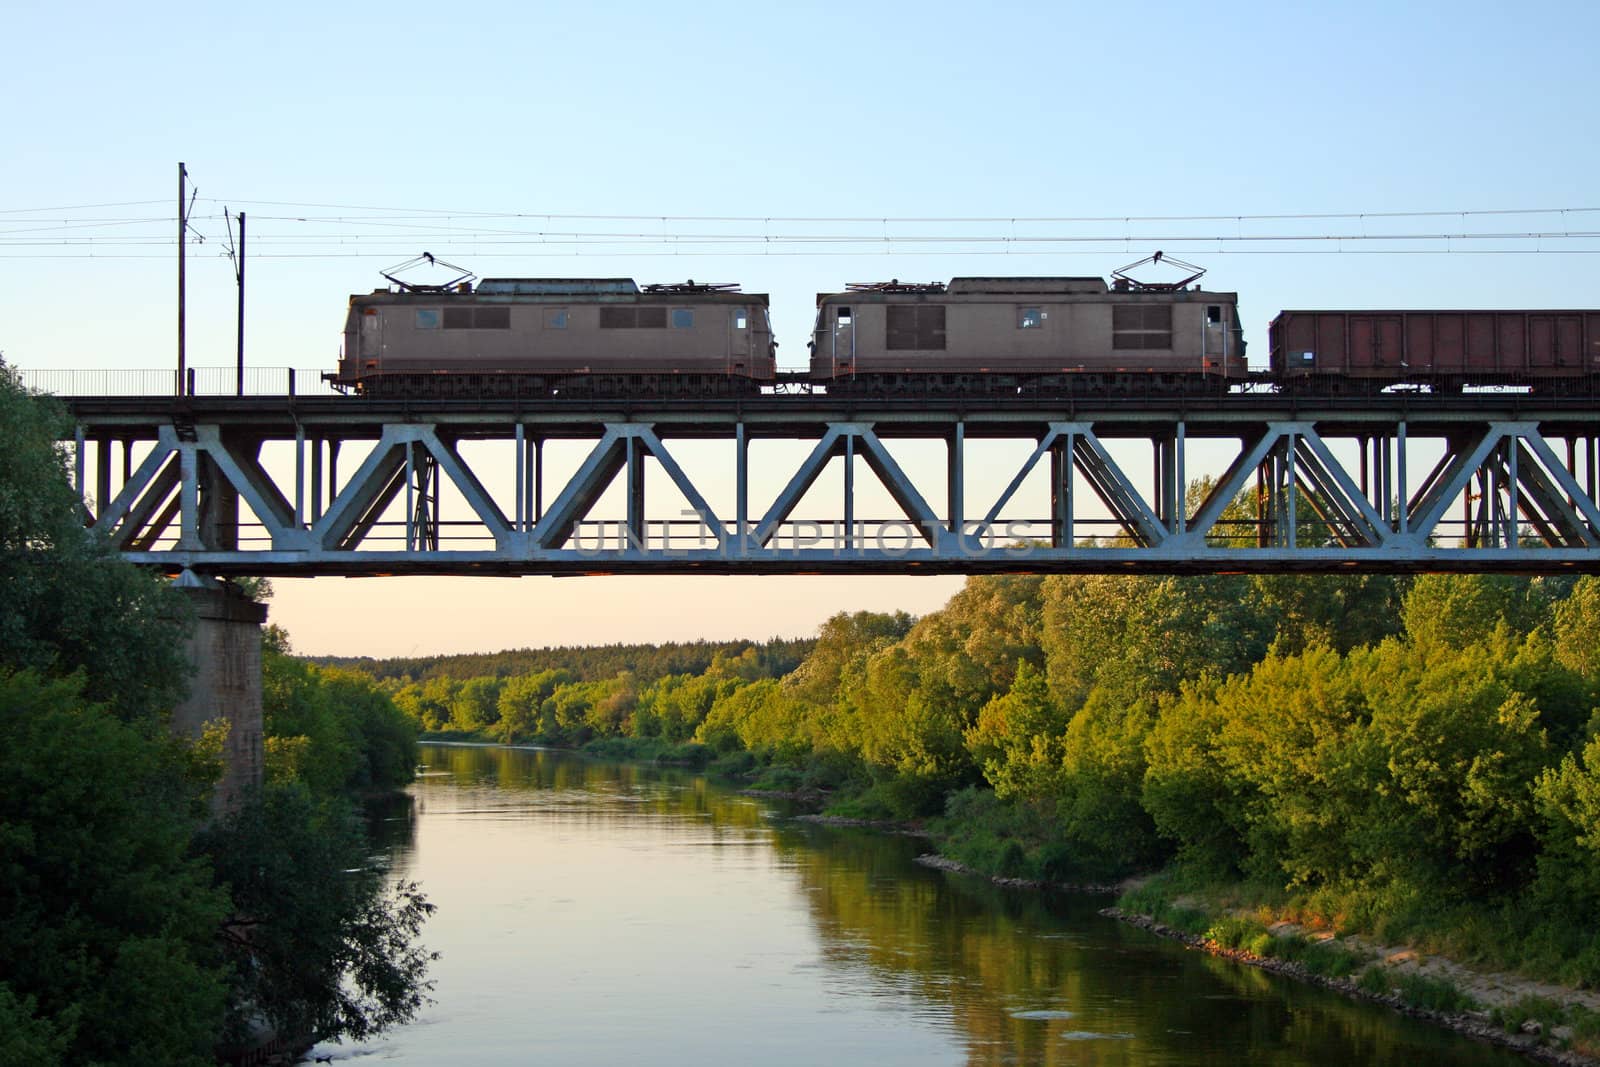 Freight train passing the steel bridge over the river